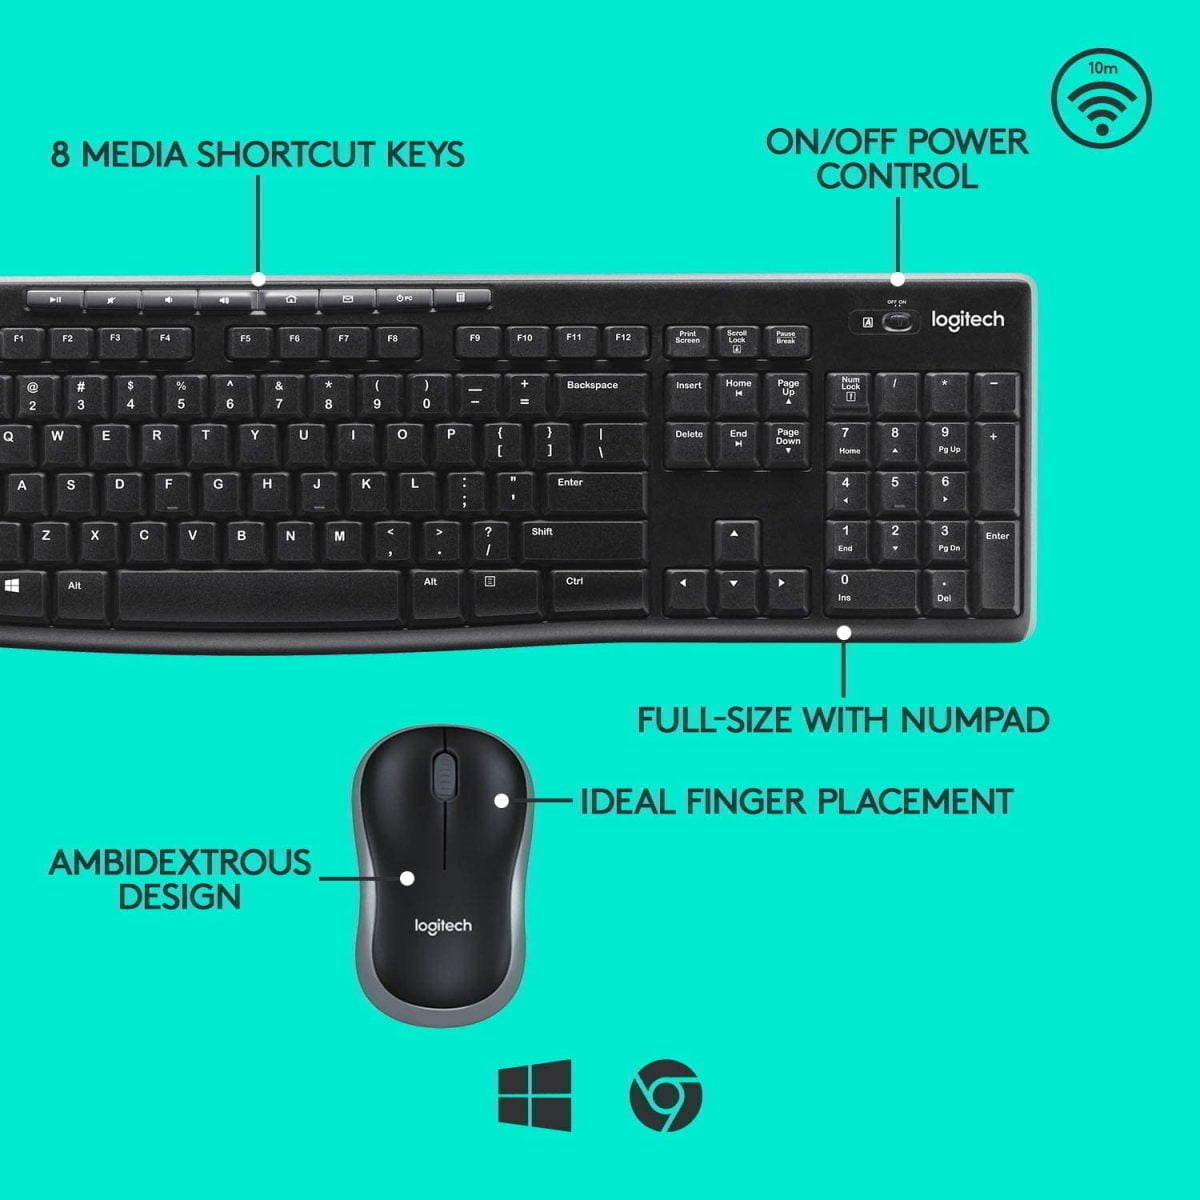 71Sfuod7Gfl. Ac Sl1500 لوجيتك Https://Www.youtube.com/Watch?V=Hhwya1Rlfts 4 Ghz Wireless Connection: A Tiny Logitech Unifying Receiver Connects Both The Keyboard And Mouse Using Just One Usb Port
Long Battery Life: Get Up To 24 Months Of Keyboard Power And 12 Months Of Mouse Power Without Changing Batteries (Keyboard And Mouse Battery Life May Vary Based On User And Computing Conditions)
No Software Installation Required لوجيتك – كومبو لاسلكي Mk270 مع لوحة مفاتيح وماوس – أسود